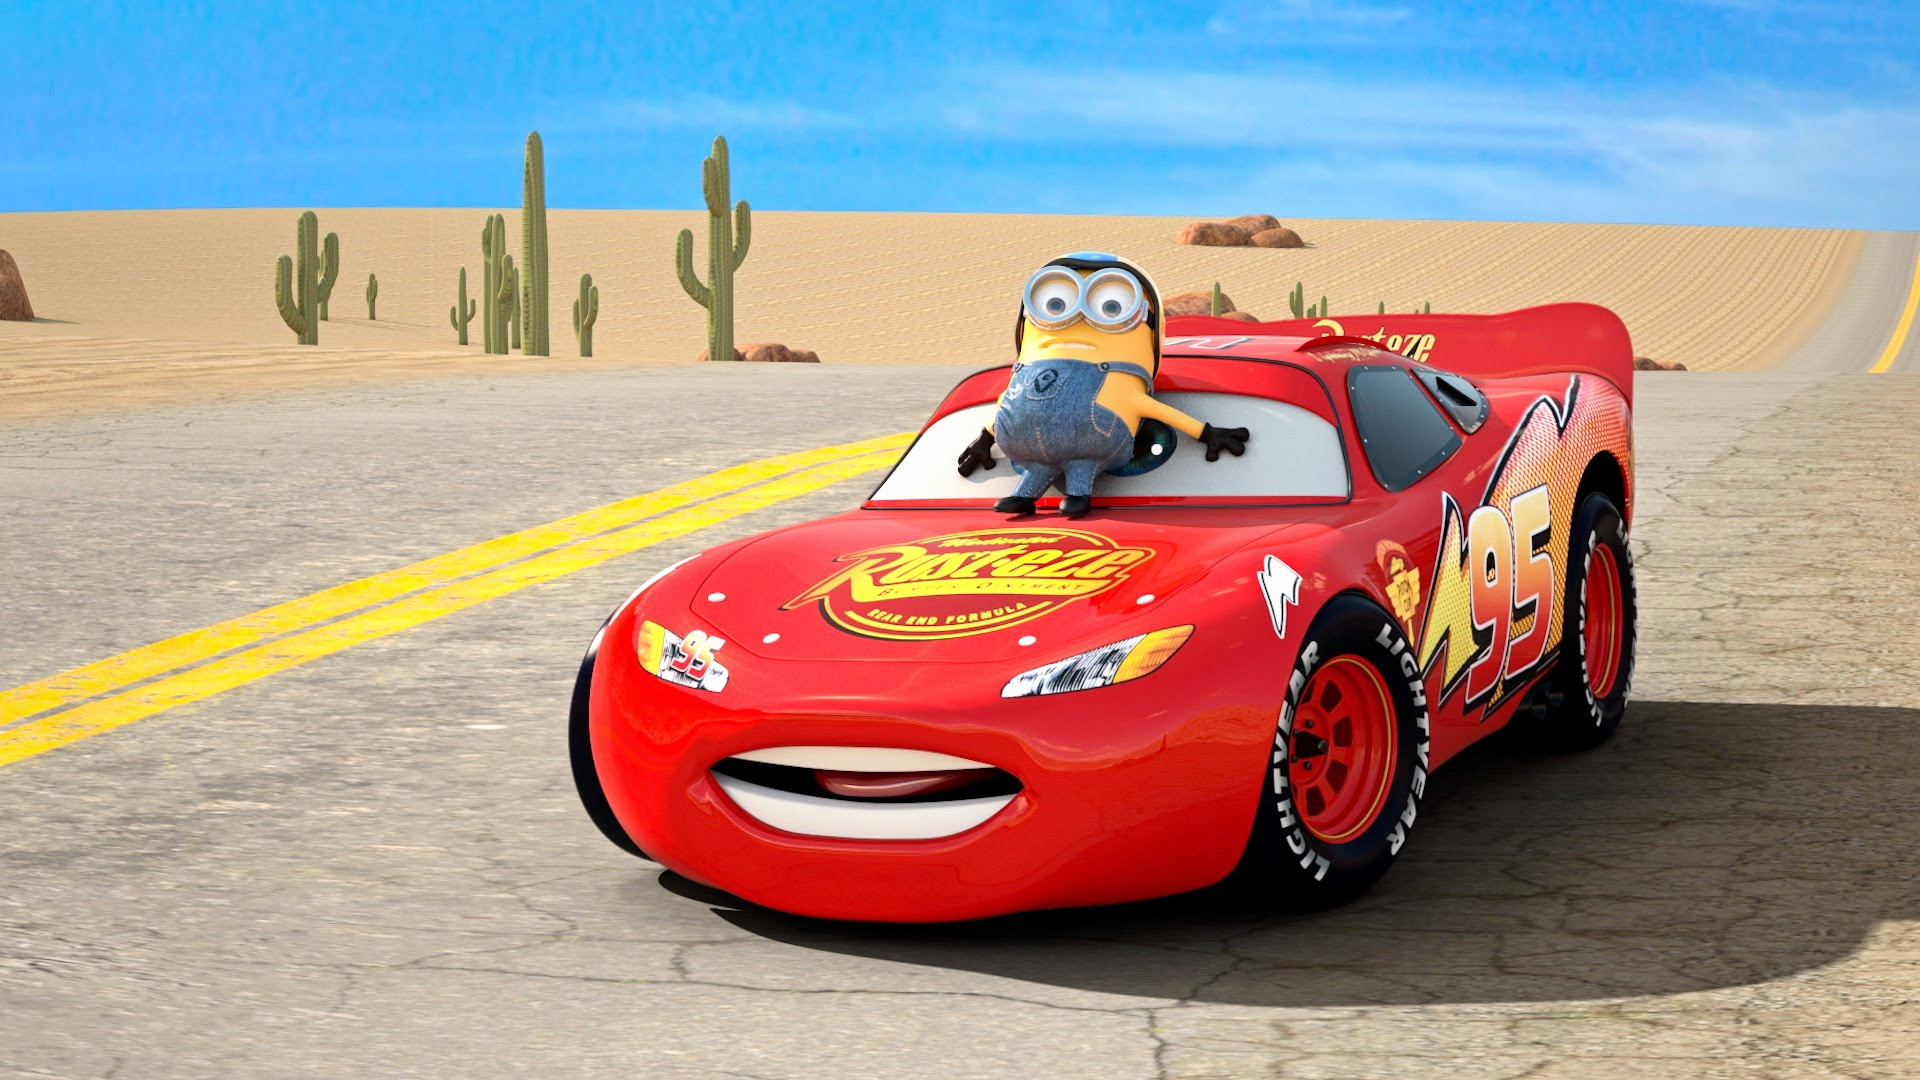 Disney Cars Wallpapers 51 Images - Cartoon Car On Cake , HD Wallpaper & Backgrounds